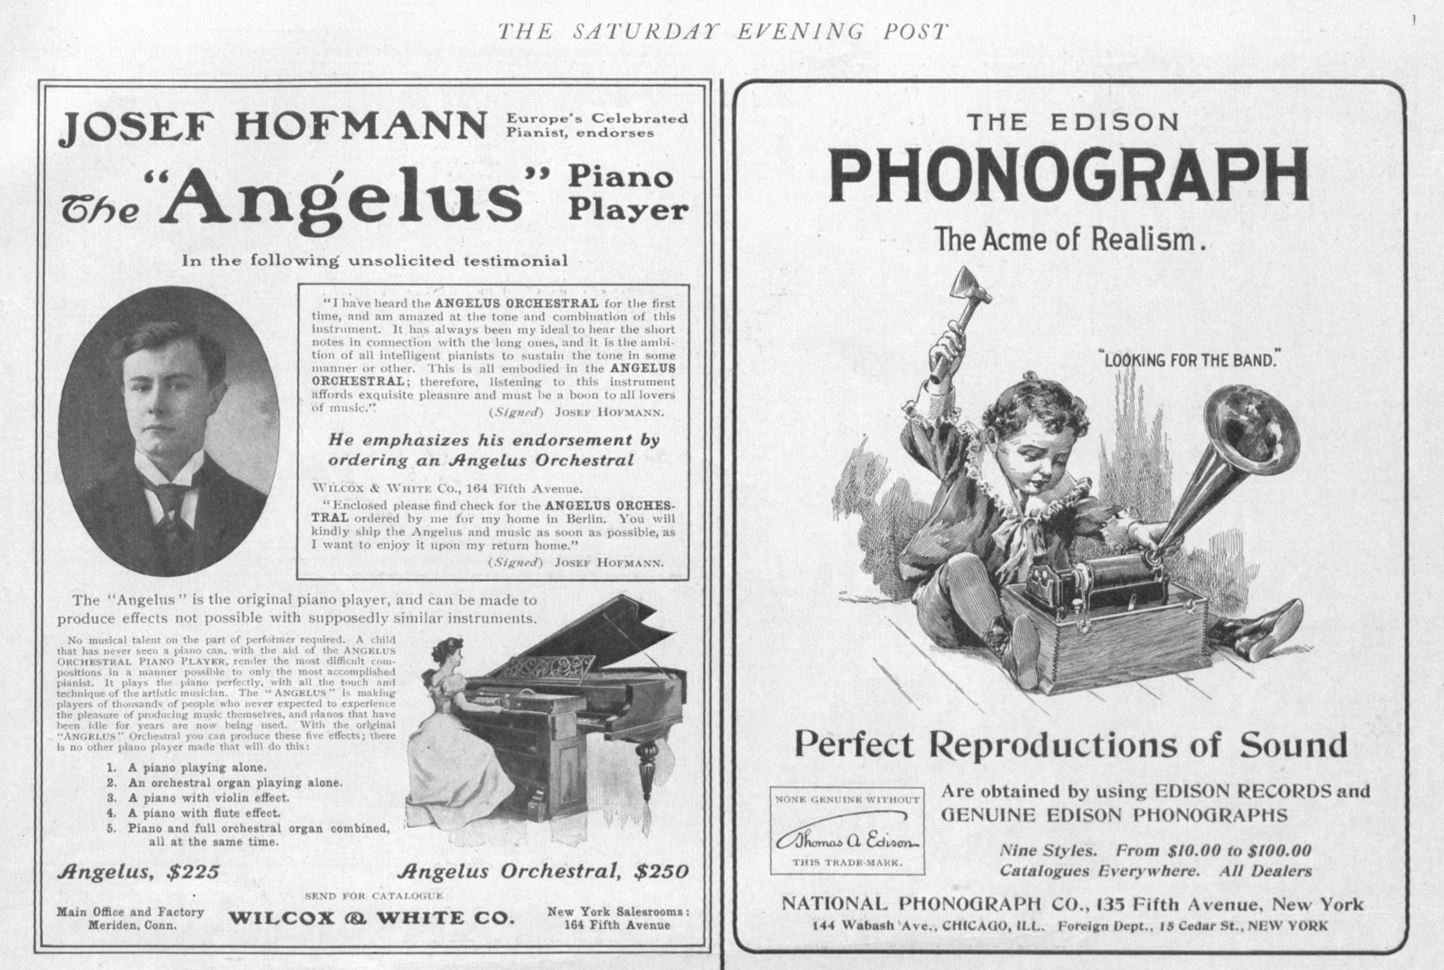 Two vintage ads for musical instruments